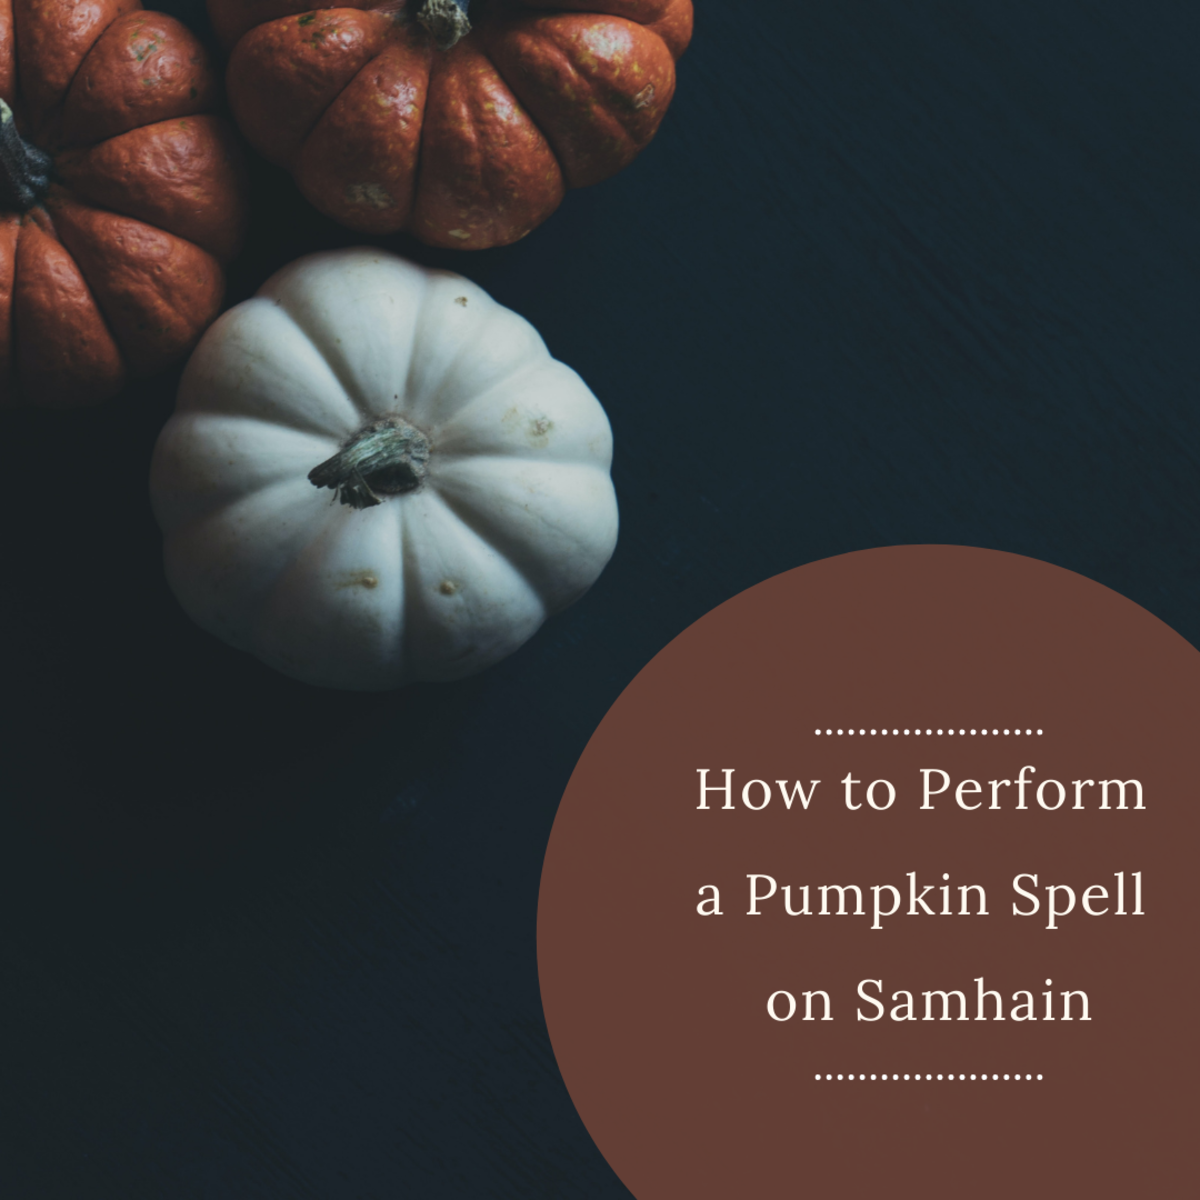 A pumpkin spell is a powerful way to connect with your ancestors during Samhain